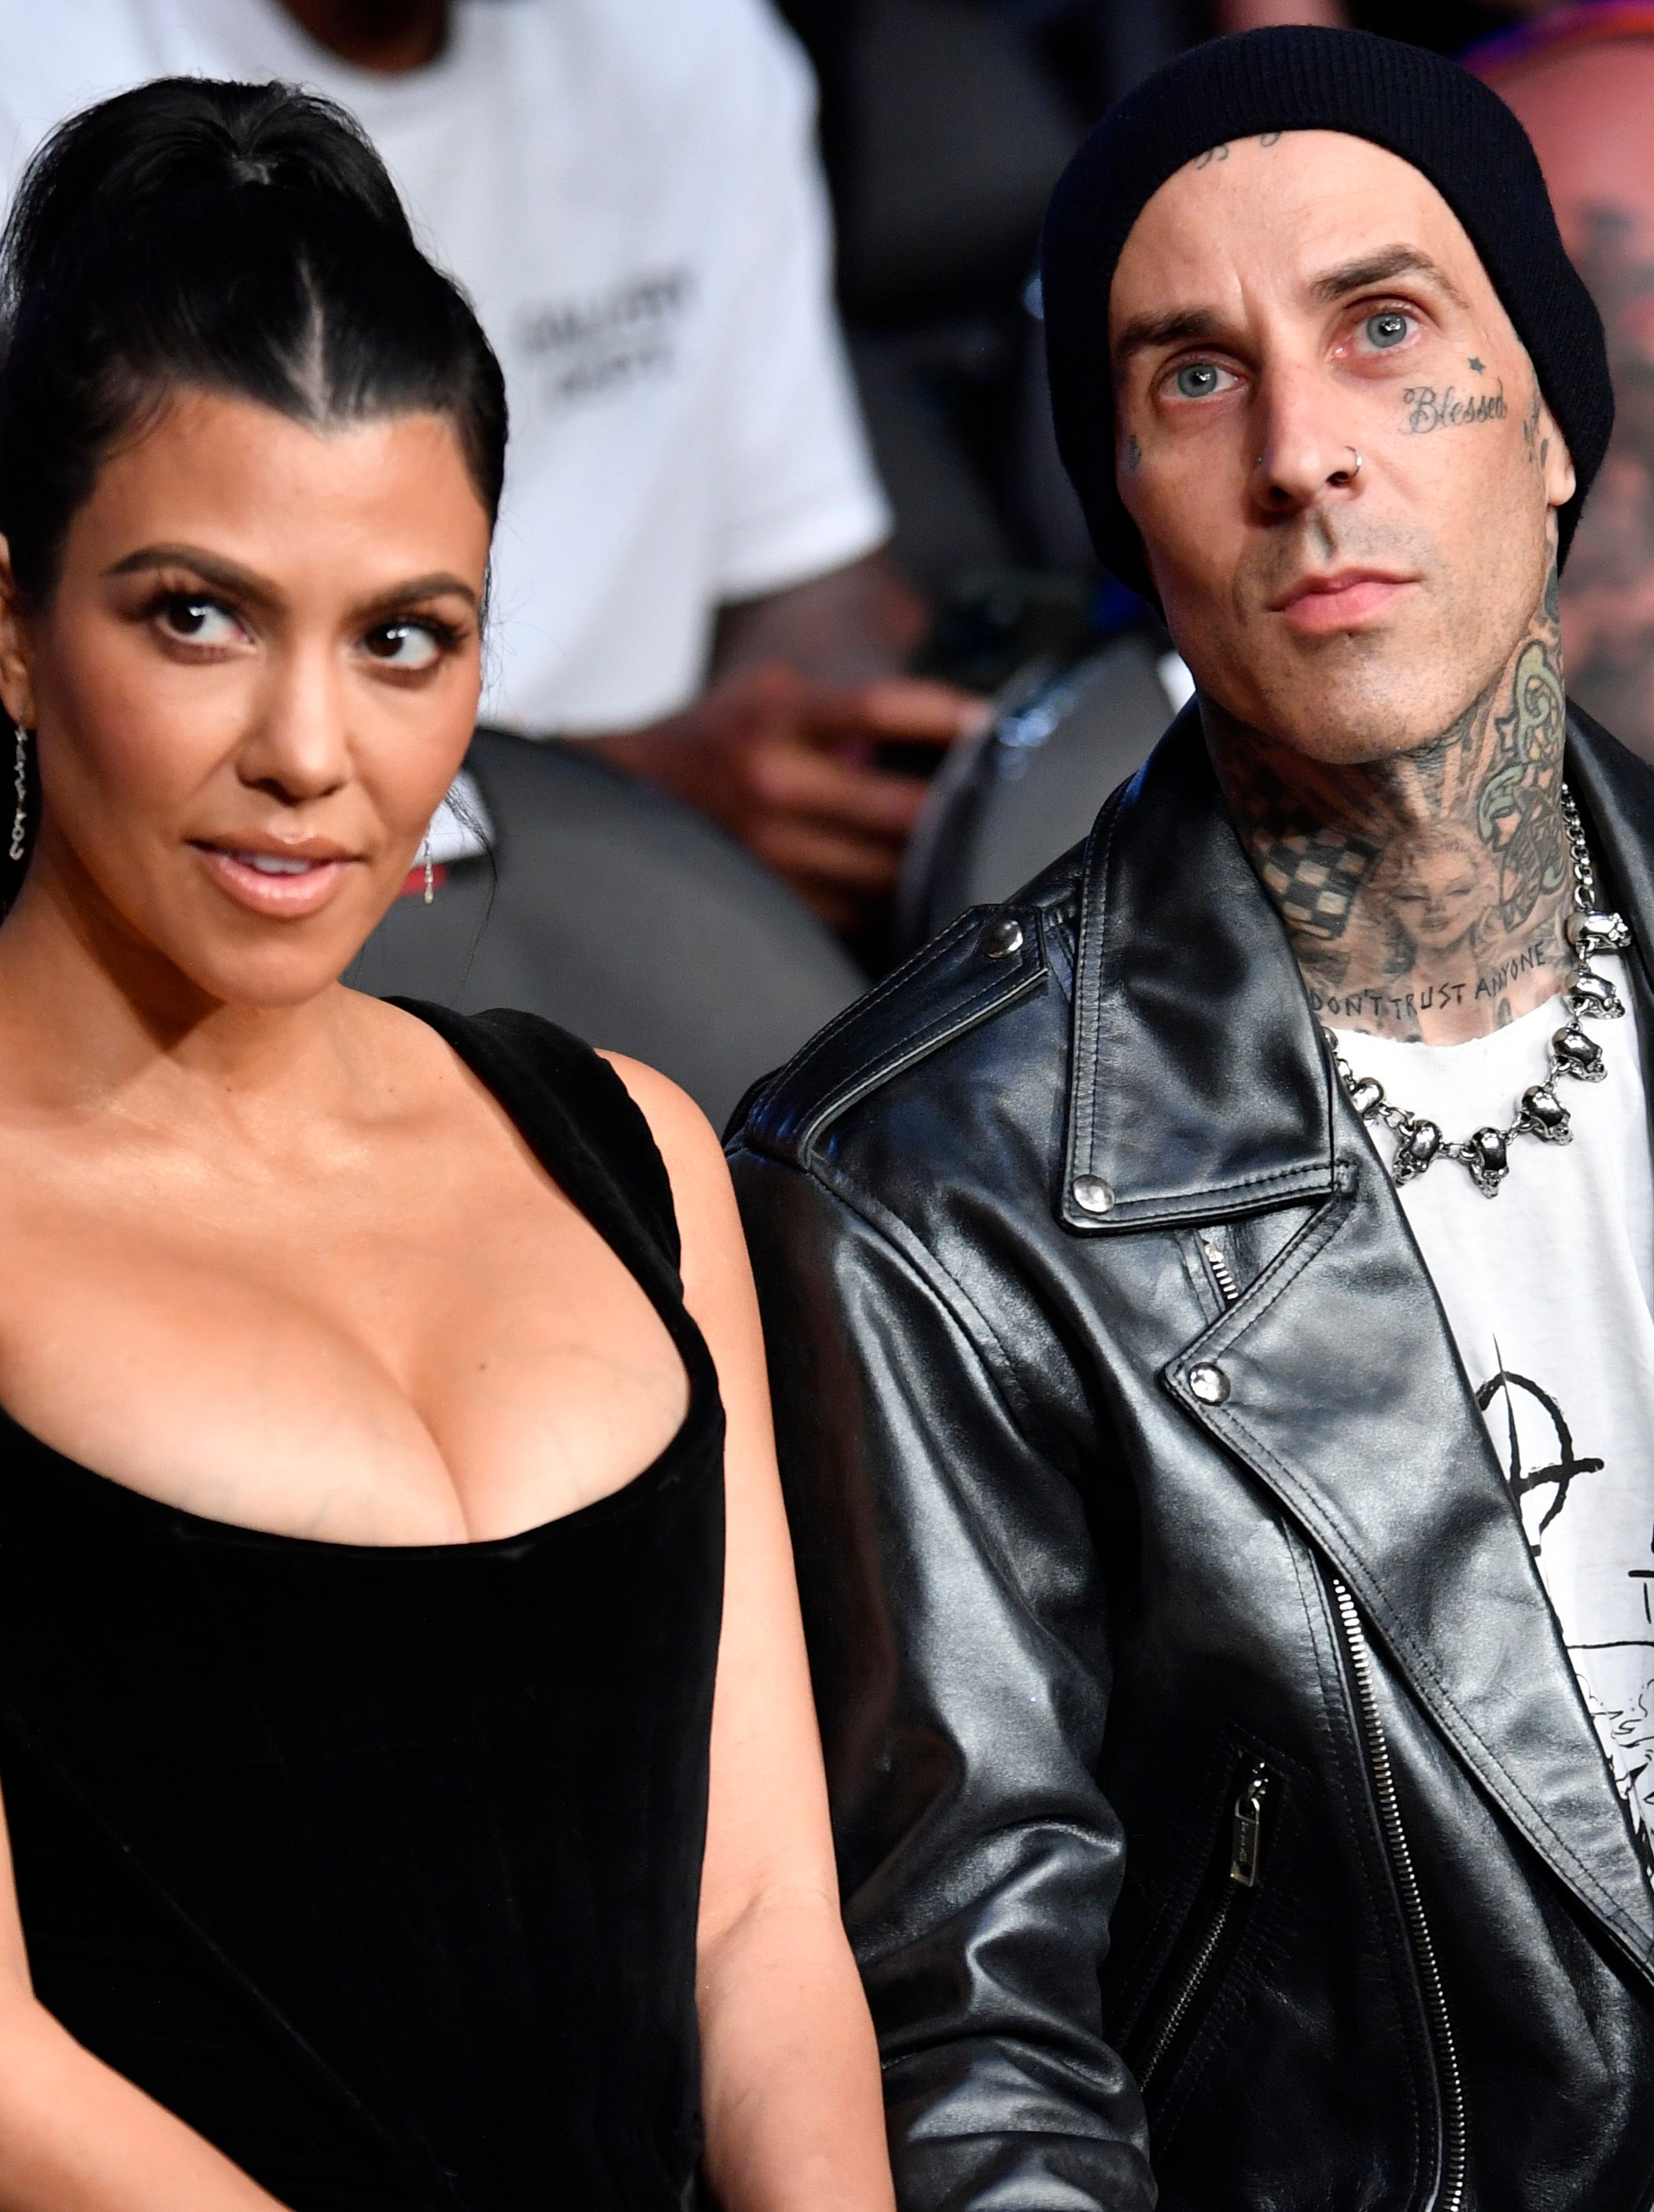 Kourtney Kardashian and Travis Barker seated at an event. Kourtney wears a low-cut dress, while Travis sports a leather jacket and beanie, showcasing his tattoos